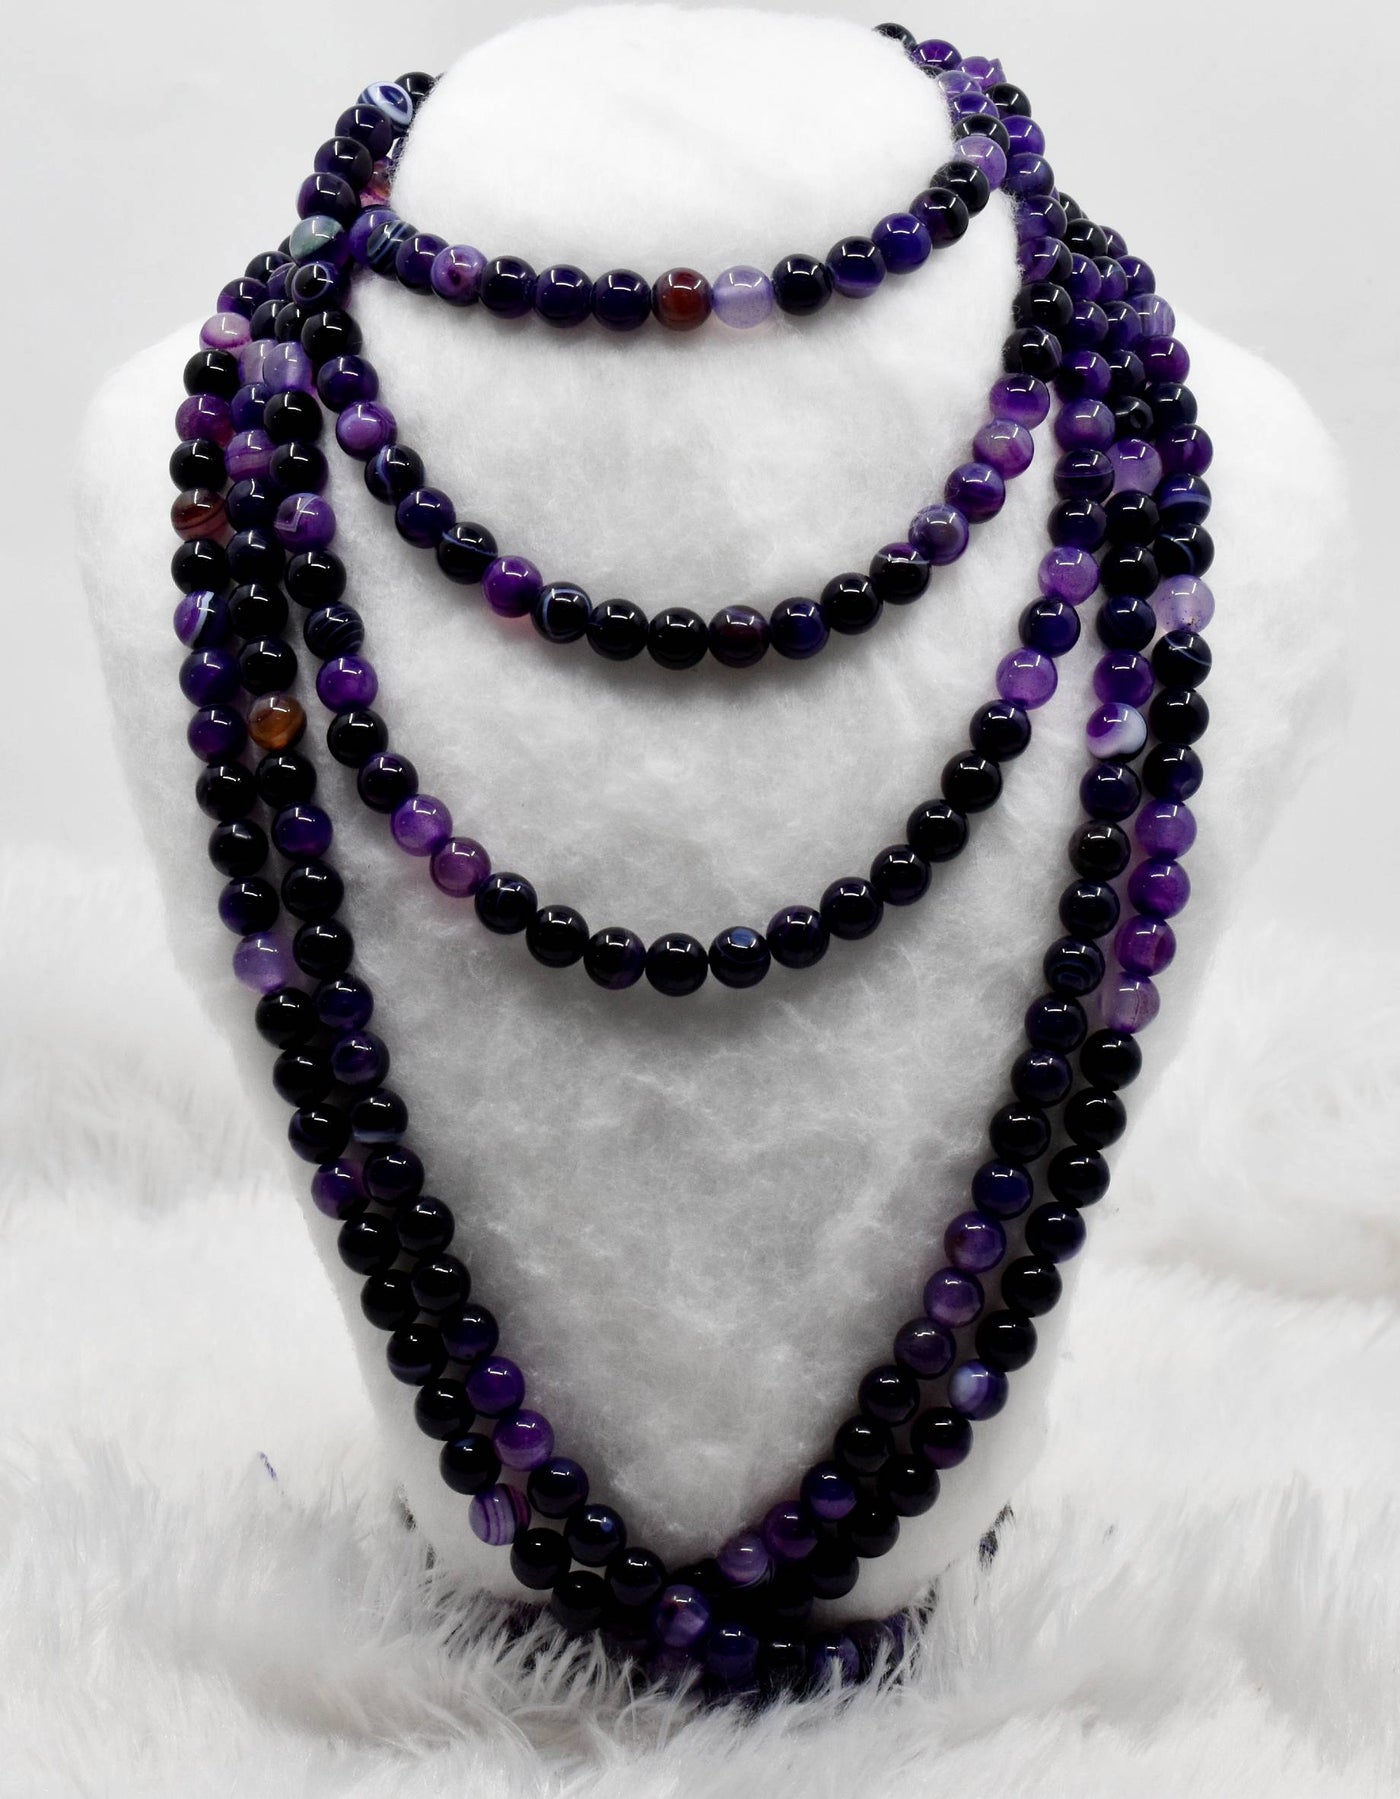 Banded Agate Purple A Grade 4mm, 6mm, 8mm, 10mm, 12mm Round Beads